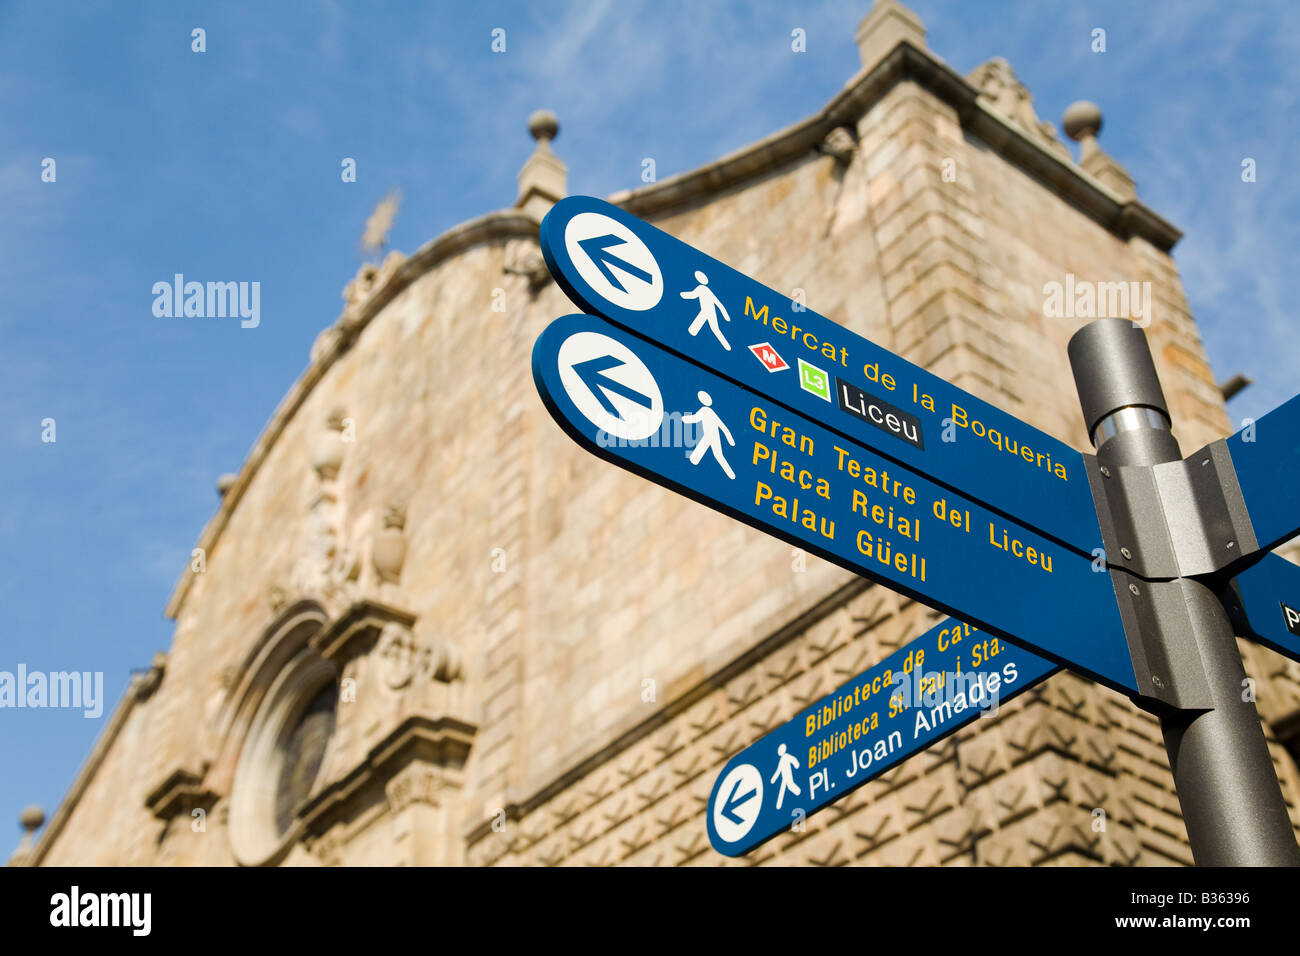 SPAIN Barcelona Signpost pointing to popular tourist destinations along Las Ramblas pedestrian walkway in the heart of the city Stock Photo